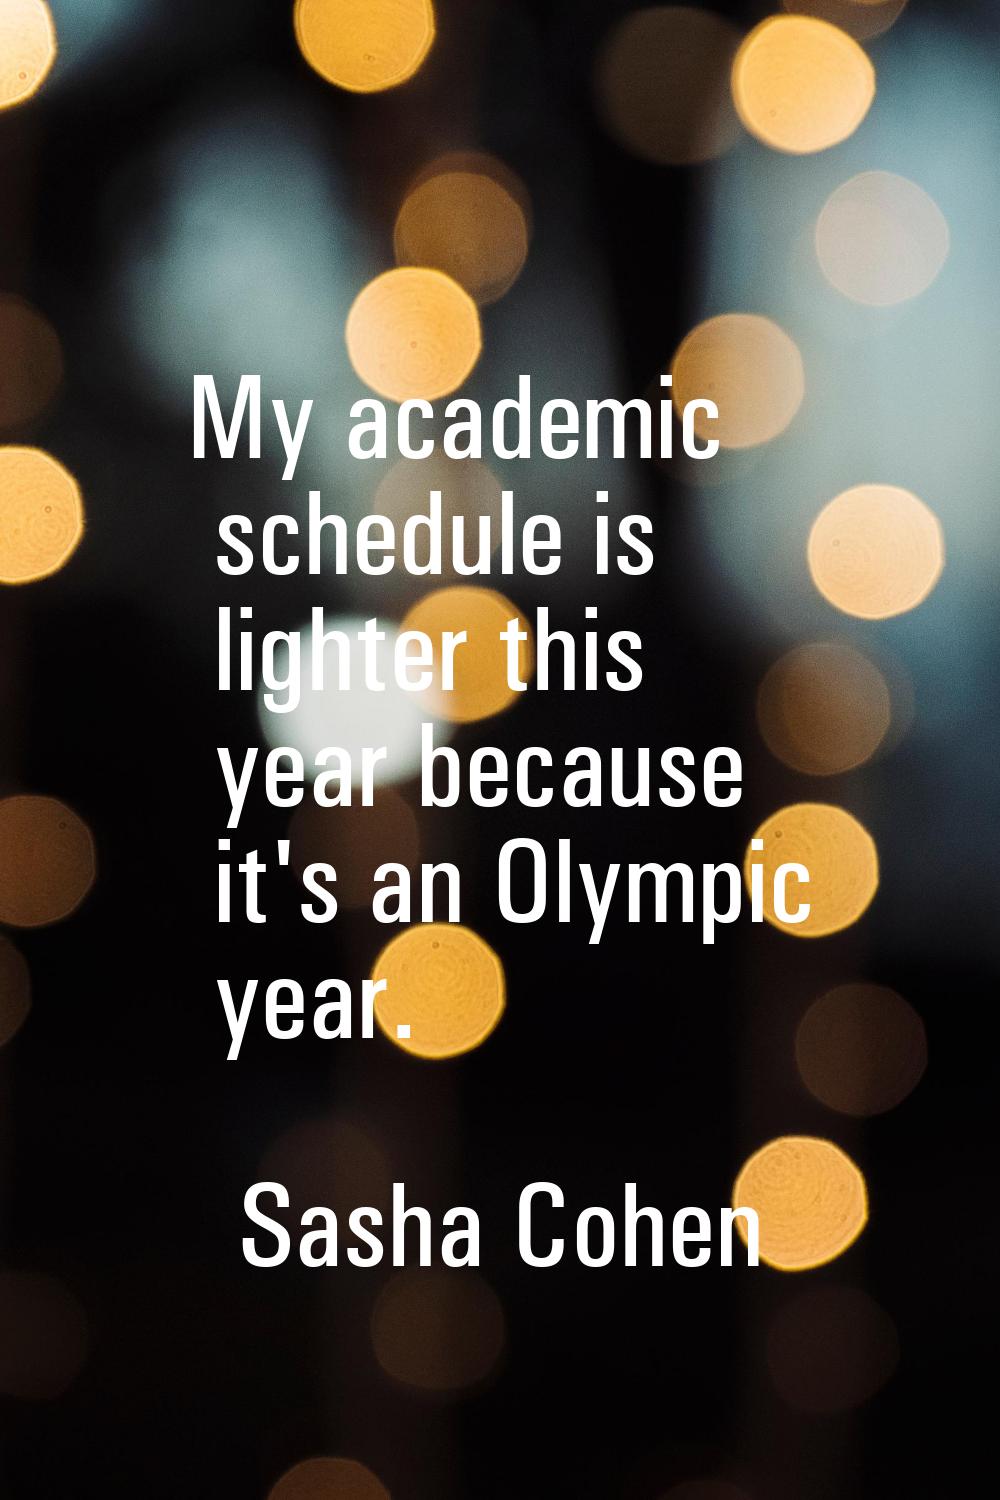 My academic schedule is lighter this year because it's an Olympic year.